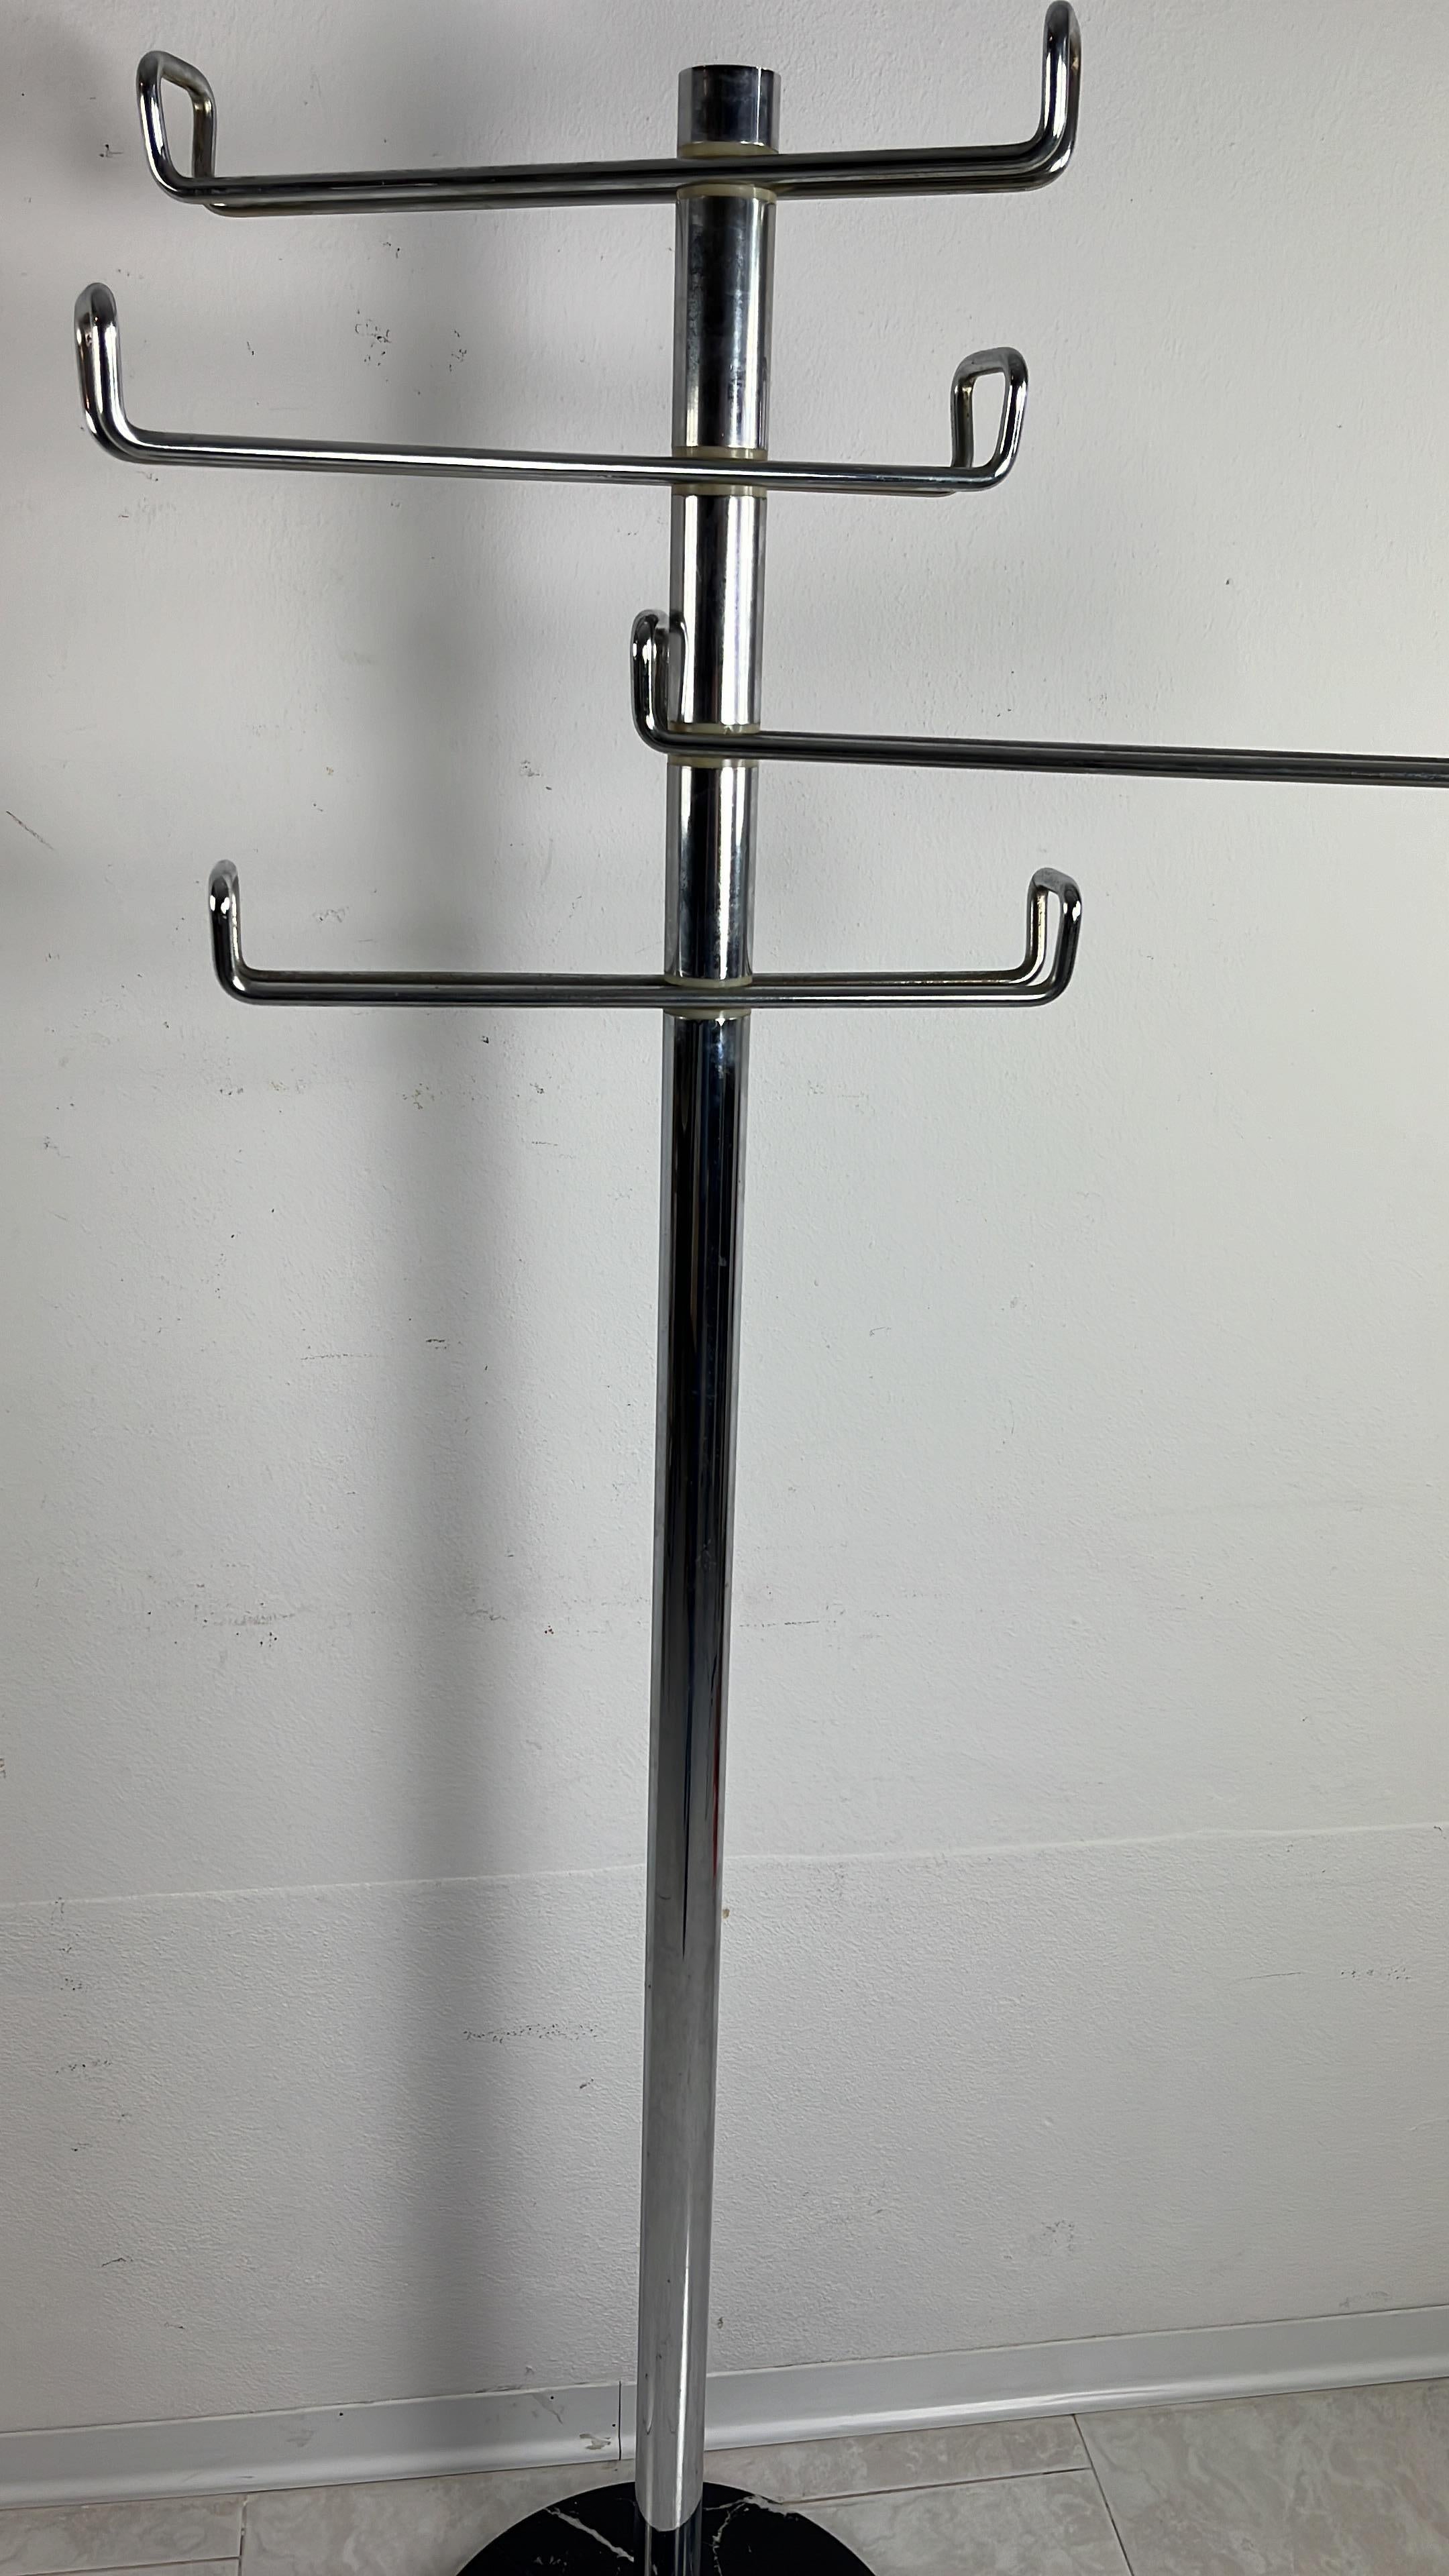 Vintage marble and steel column coat rack, Italian design 1970s.
Adjustable arms, in extension the diameter reaches 75 cm.
Intact and in good condition, small signs of aging.